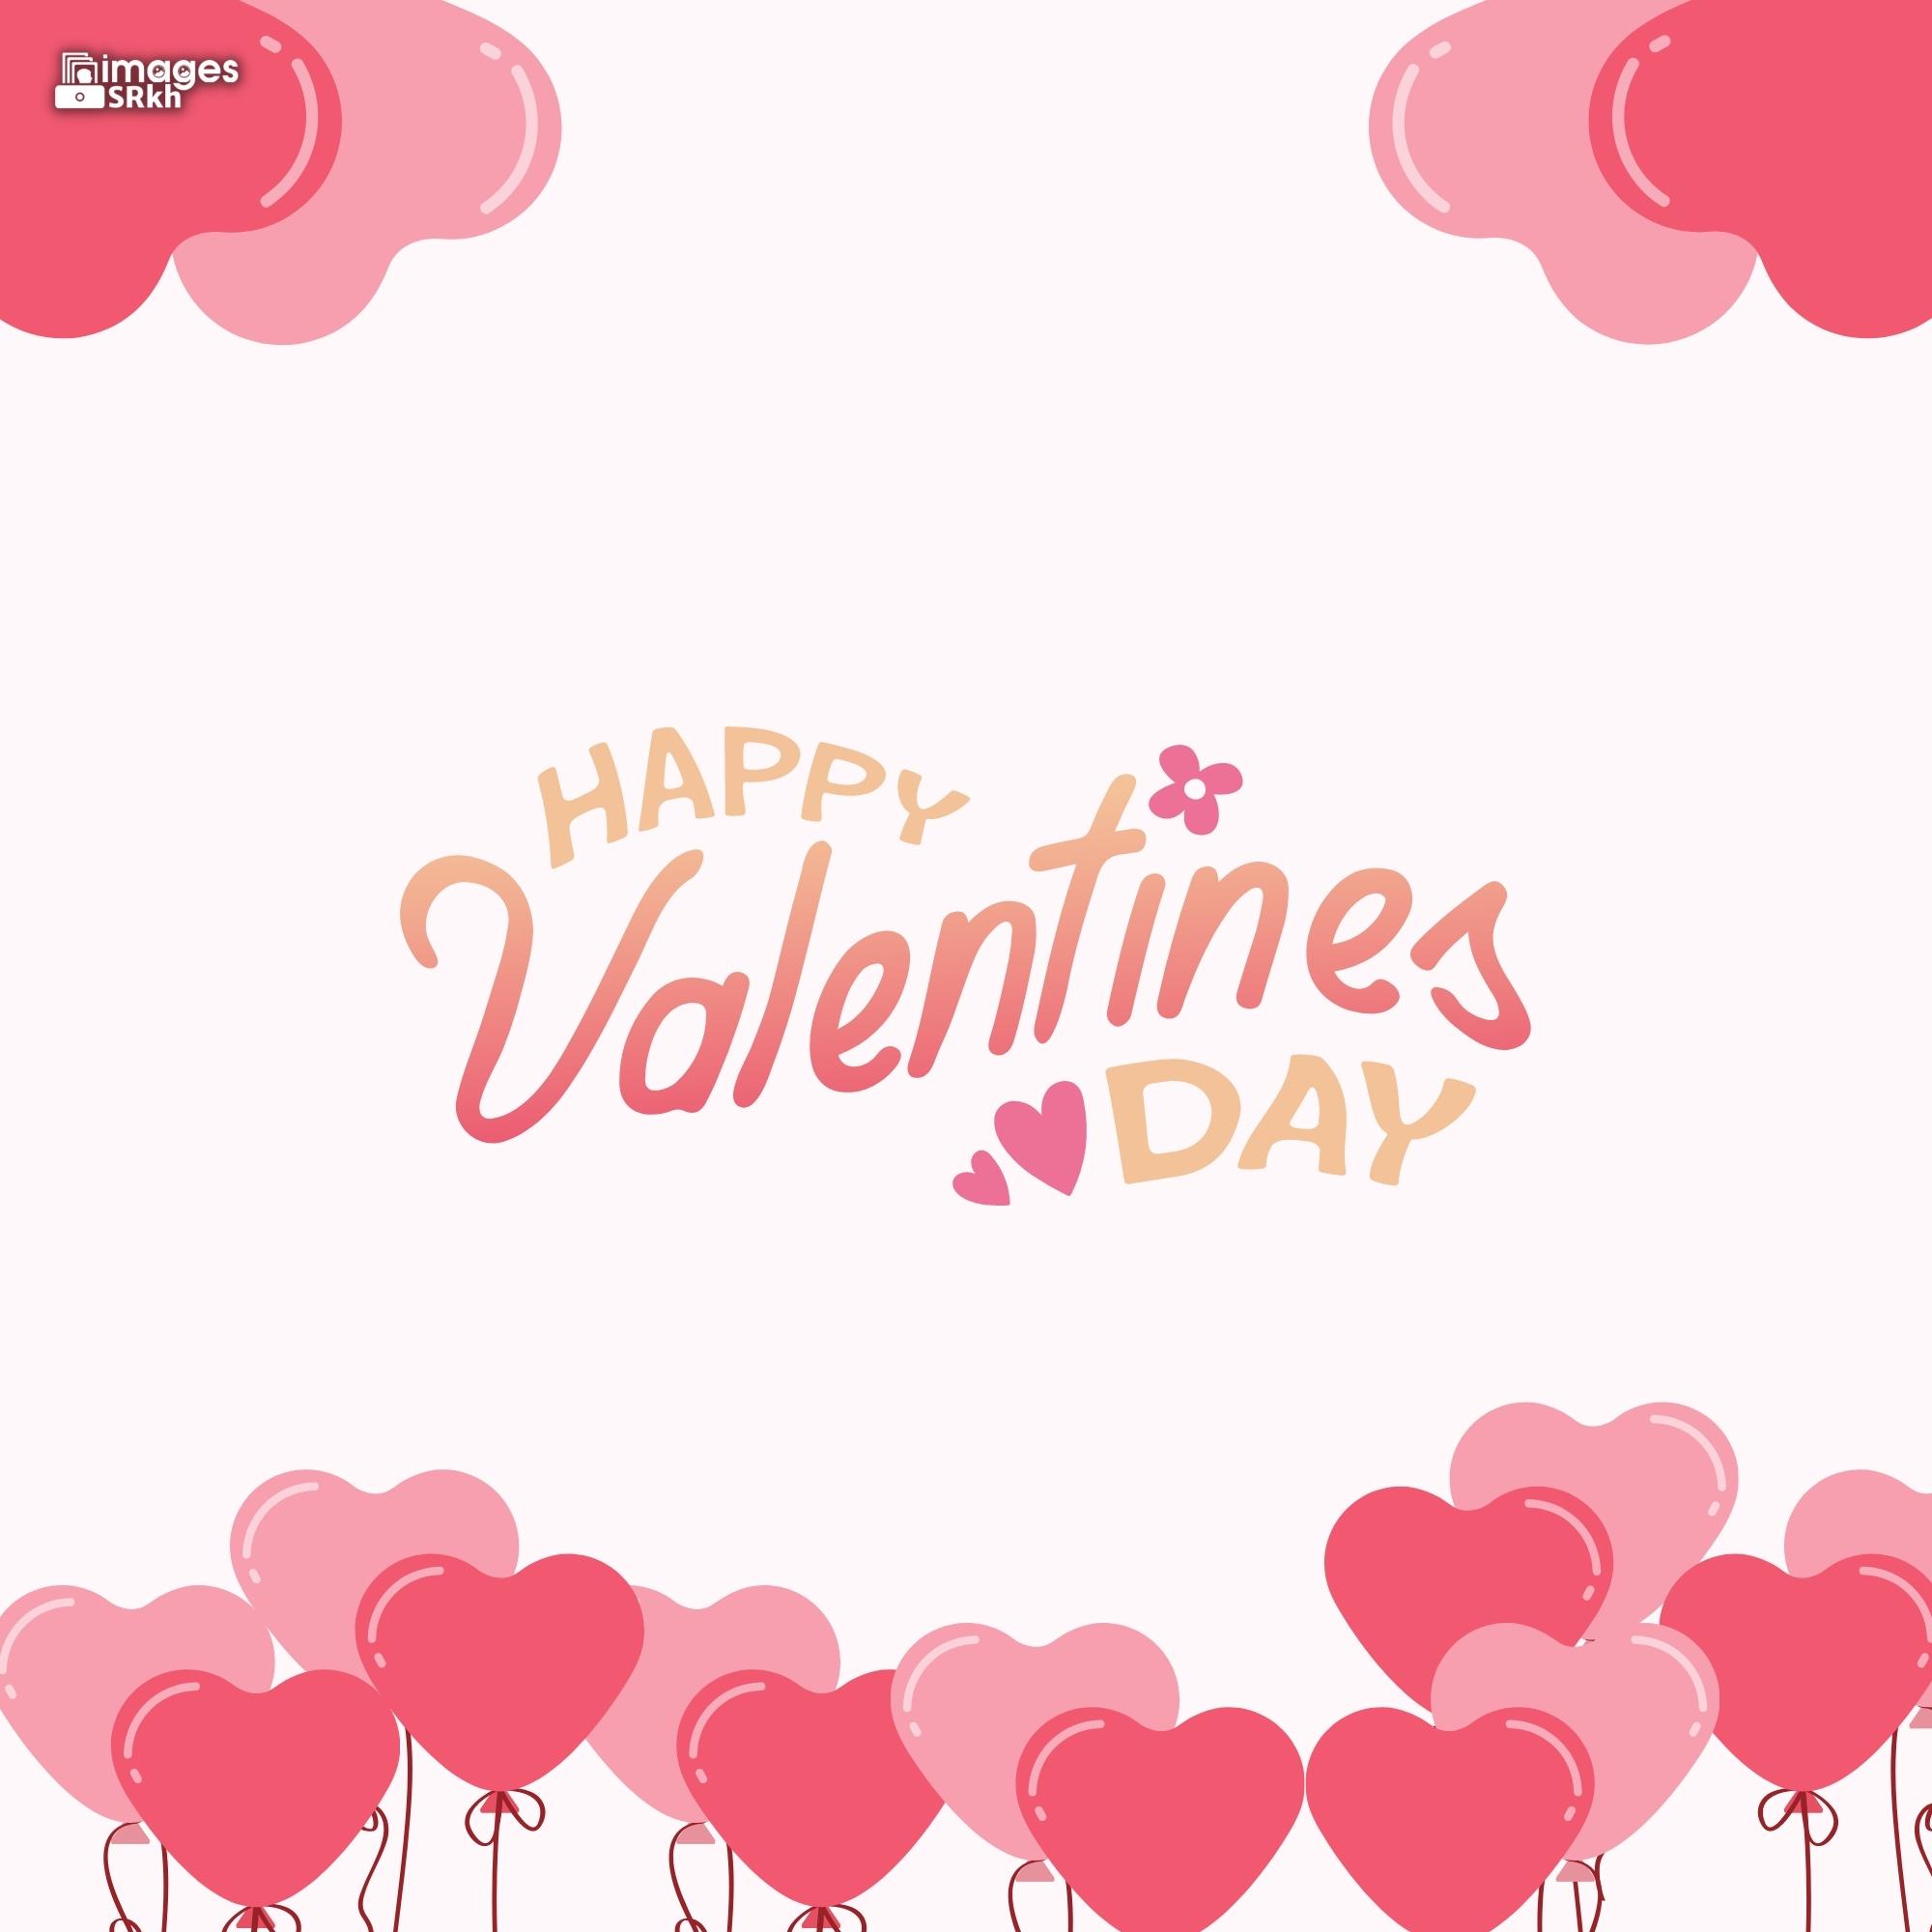 Happy Valentines Day | 532 | PREMIUM IMAGES | Wishes for Love